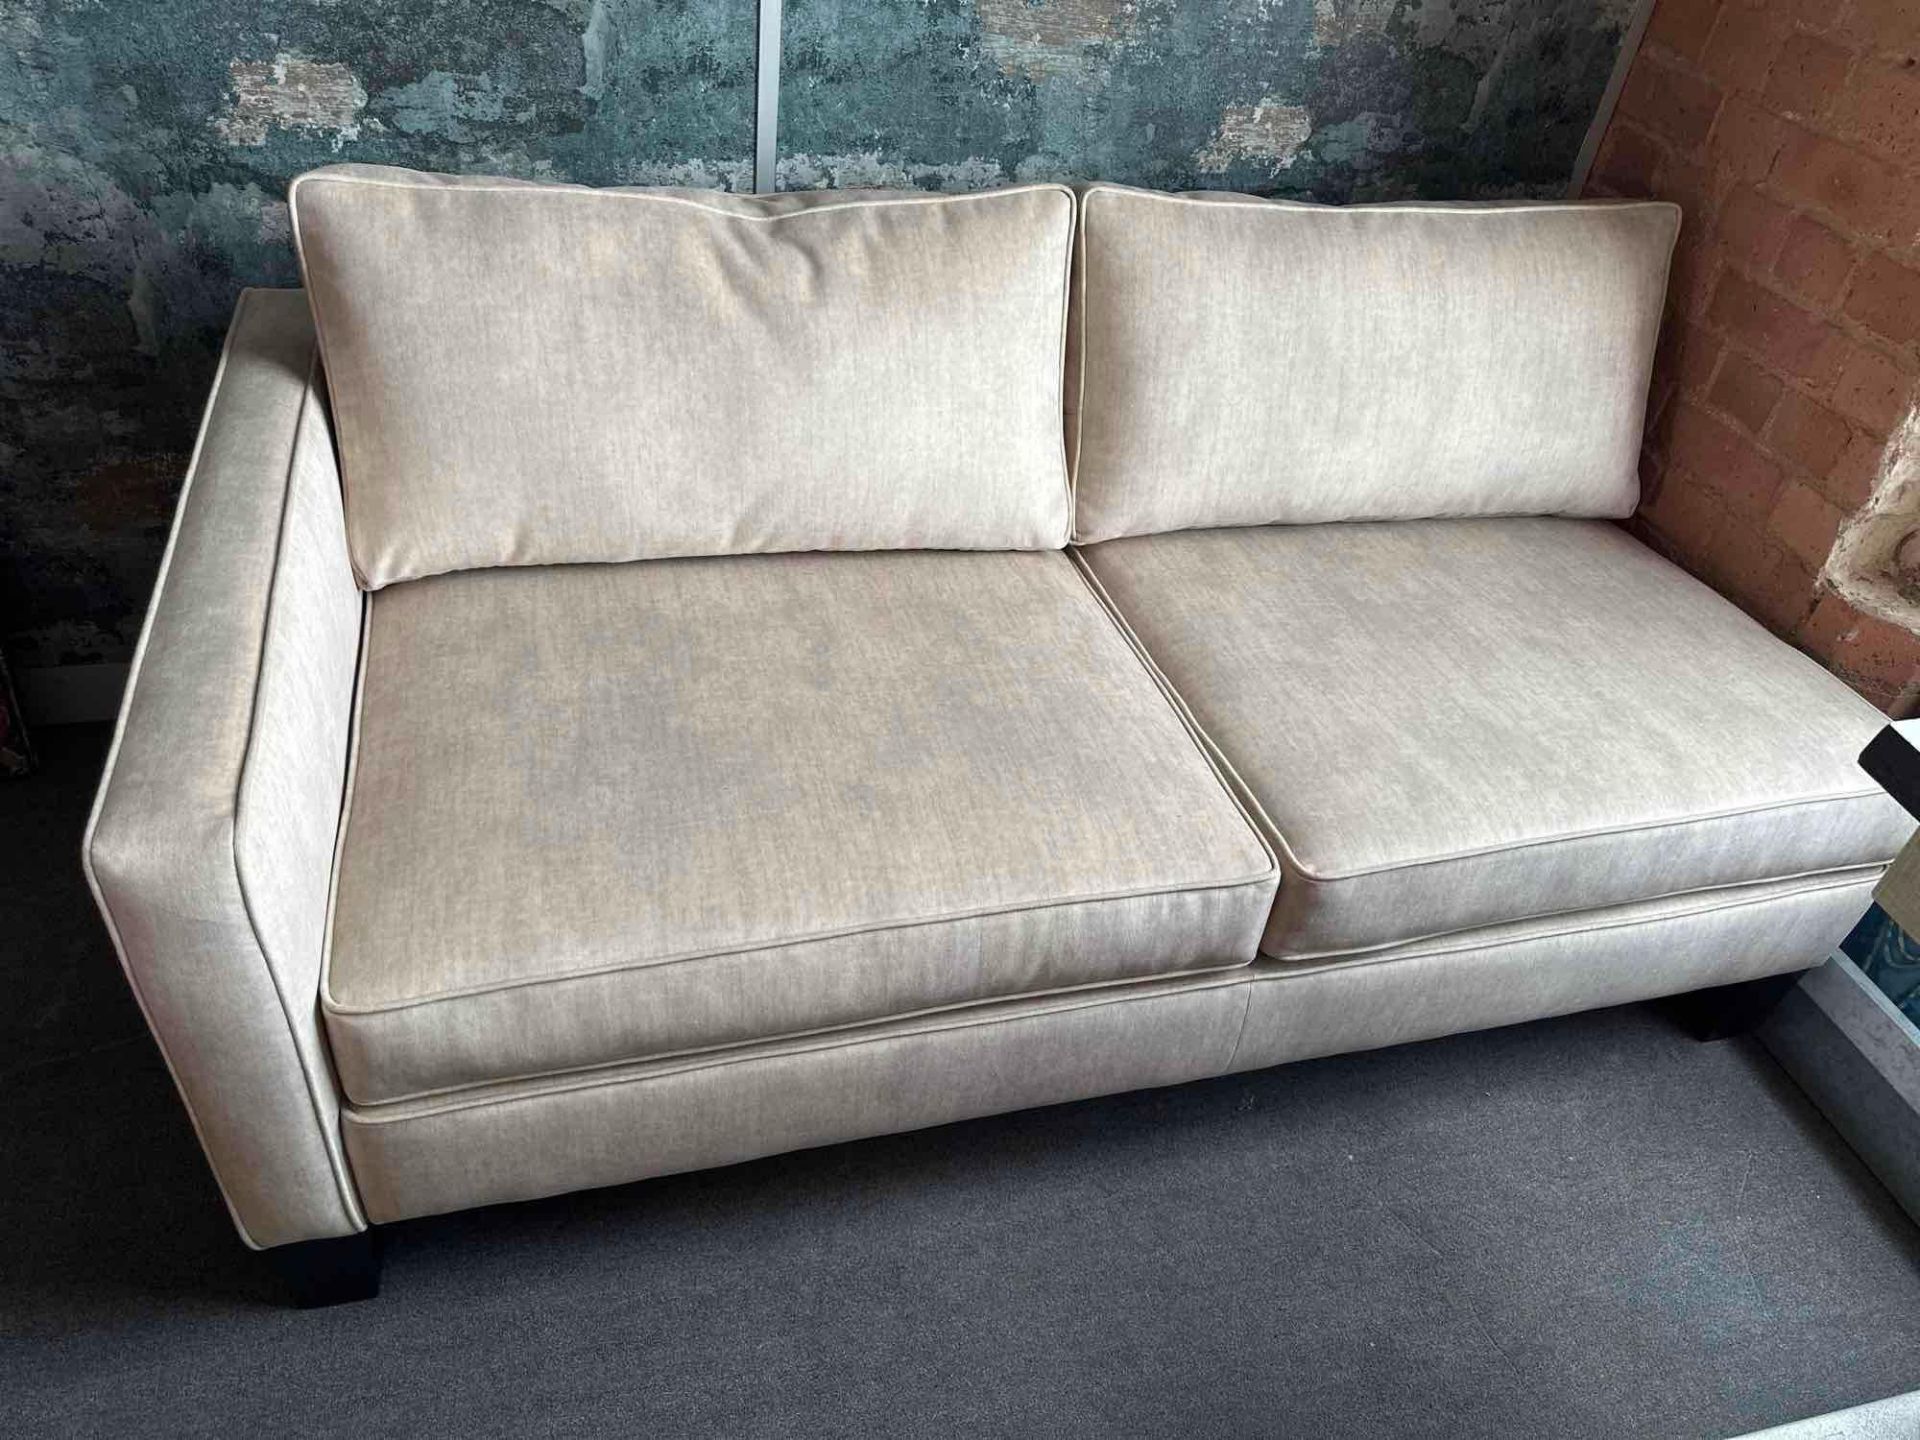 A Two Seater Module Single Left Hand Facing Arm Sofa Upholstered In John Brown Fabric With Piping - Image 2 of 4